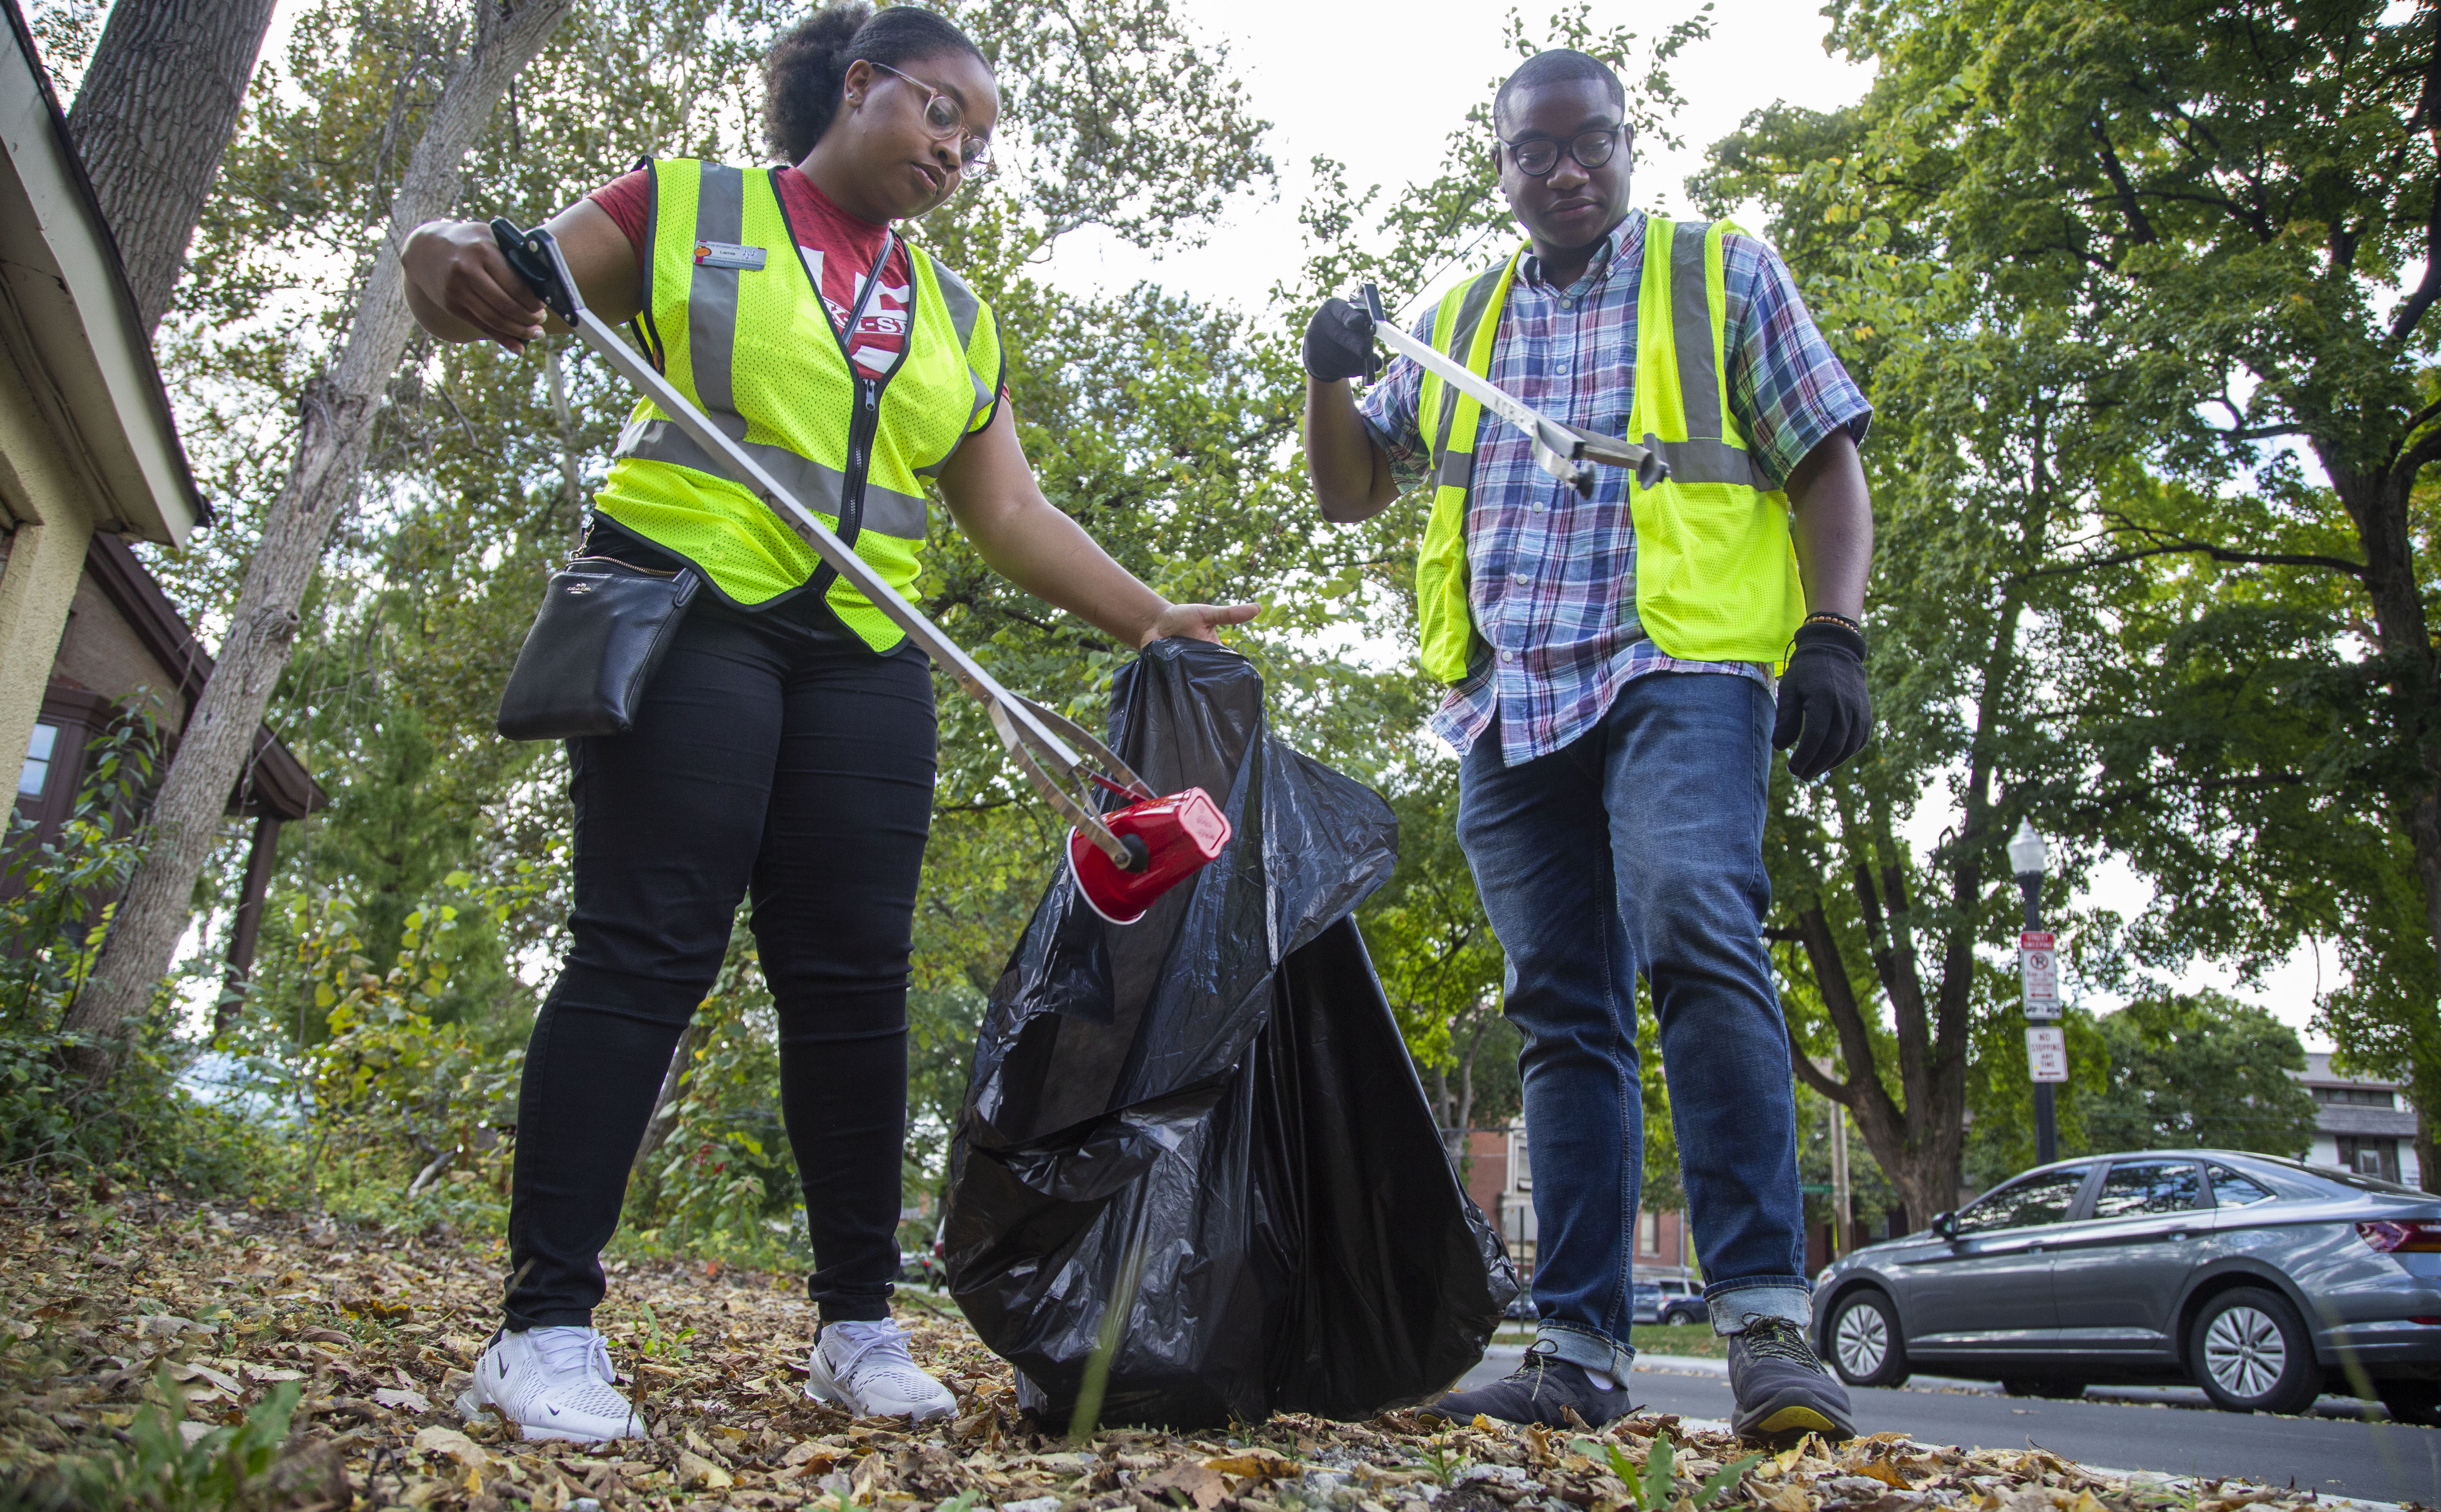 Students participating in the University District Clean Up